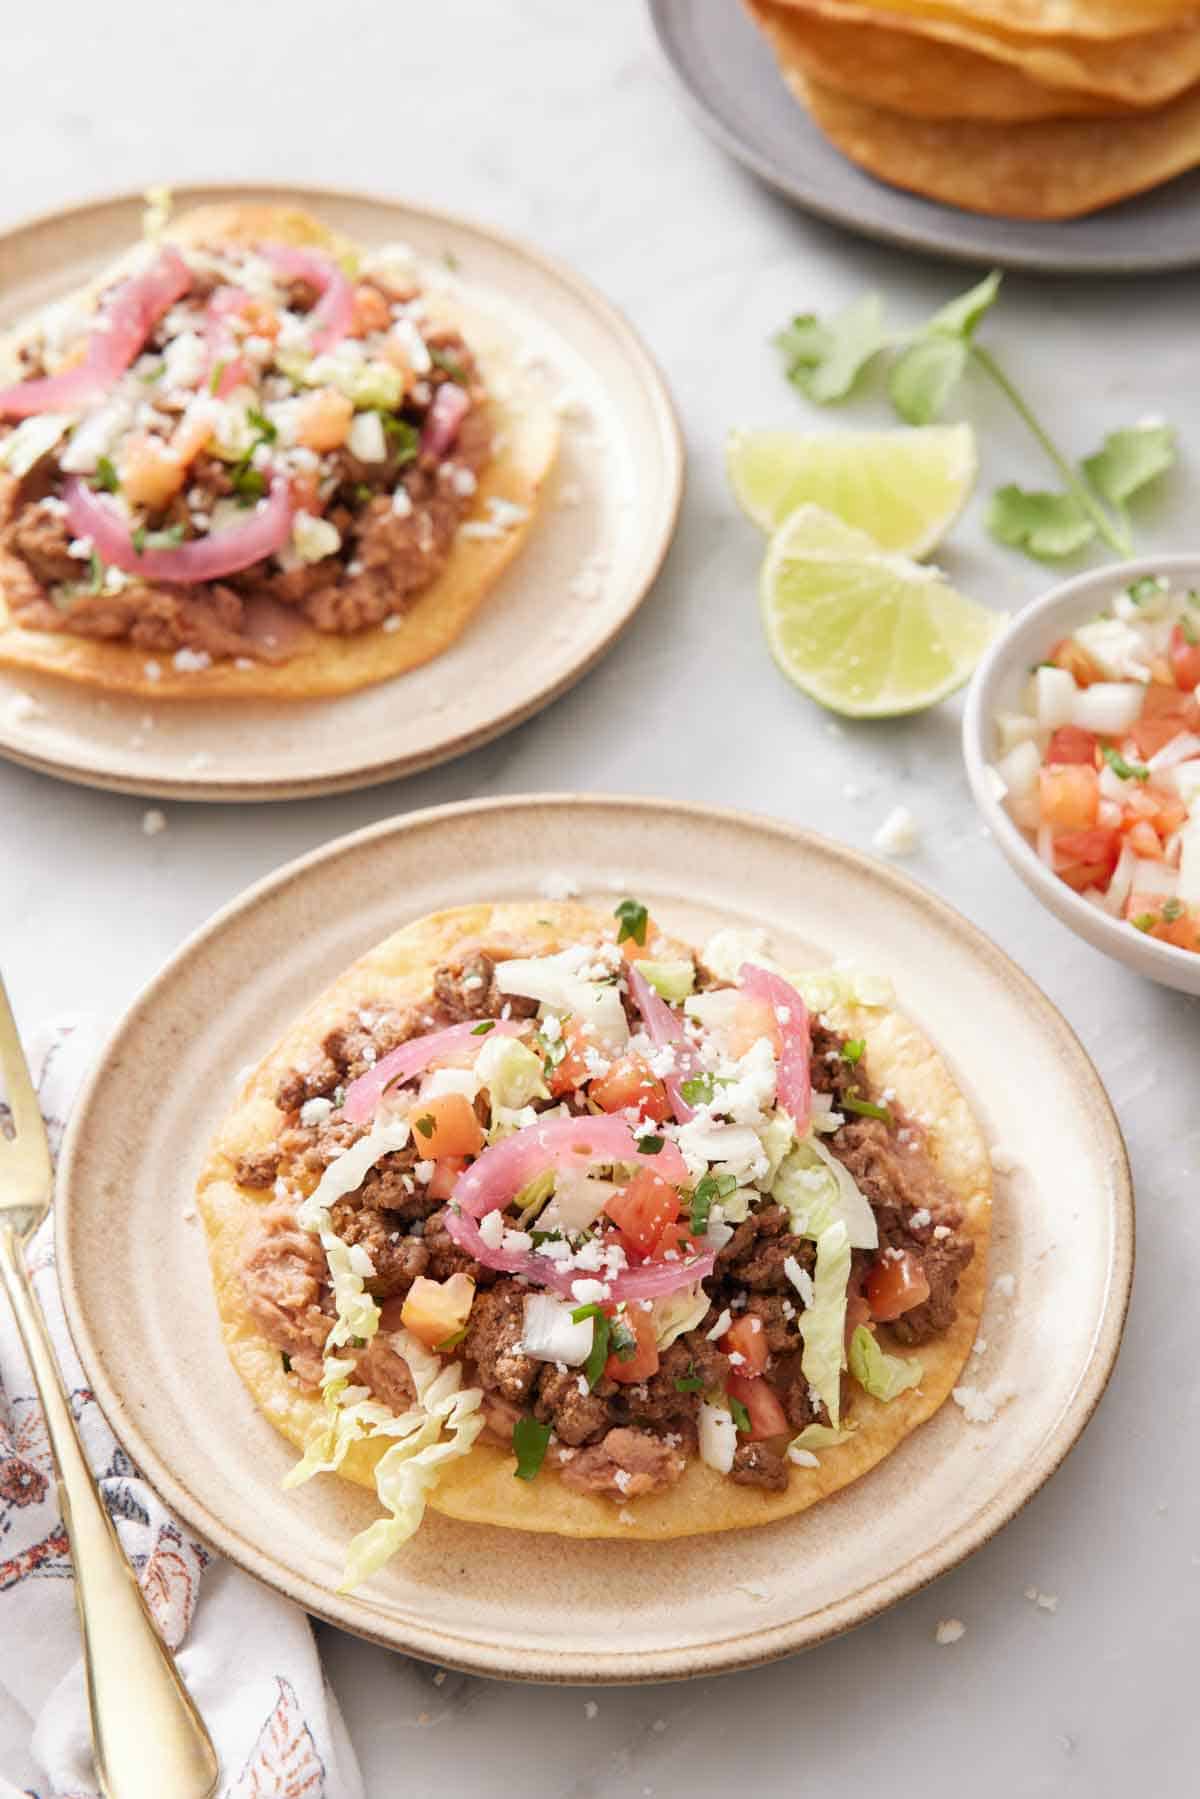 A plate with a tostada with a second plate in the background along with cut limes, cilantro, and a bowl of pico de gallo.